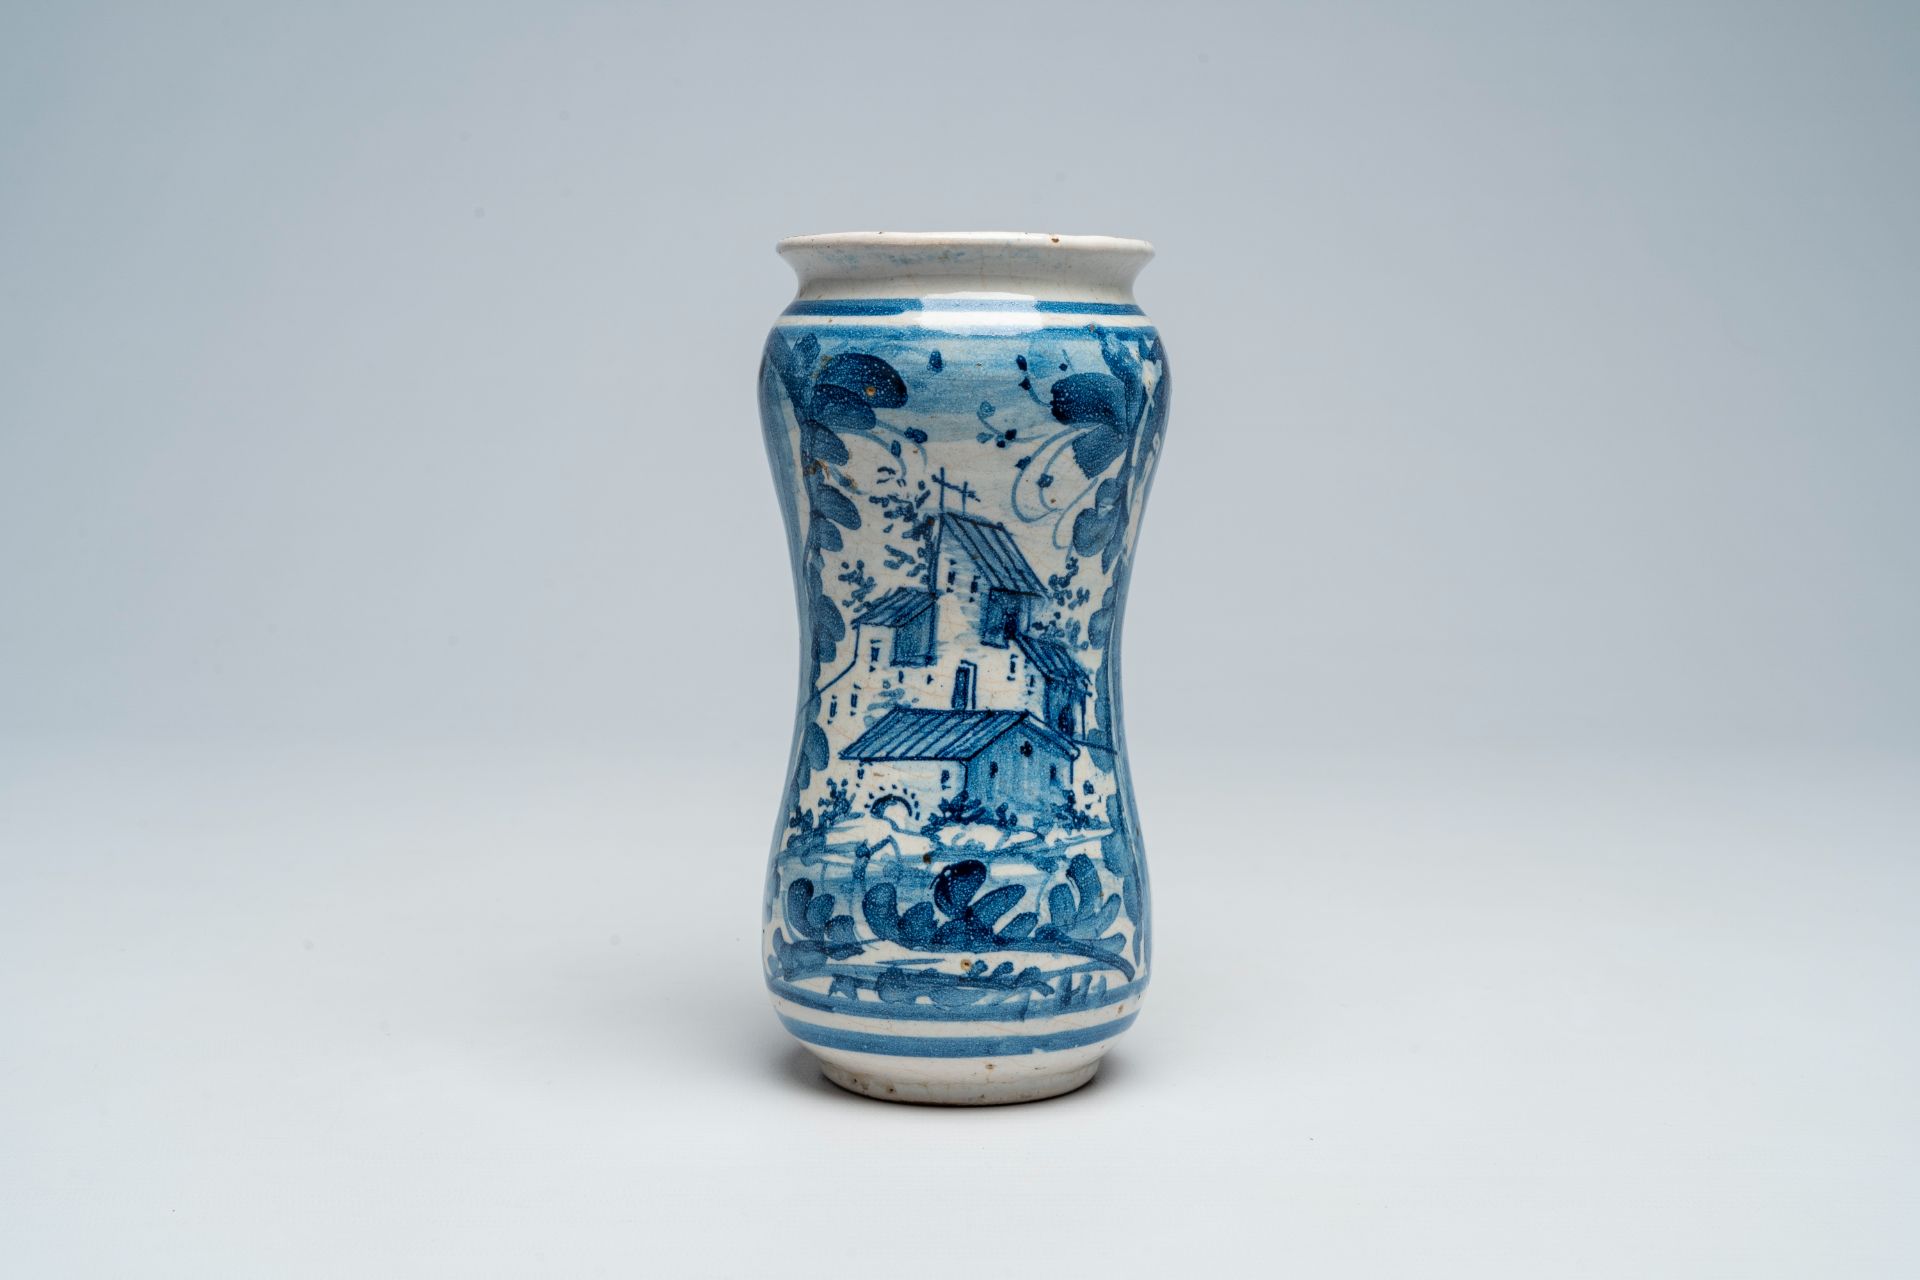 An Italian blue and white albarello with a landscape, dated 1710